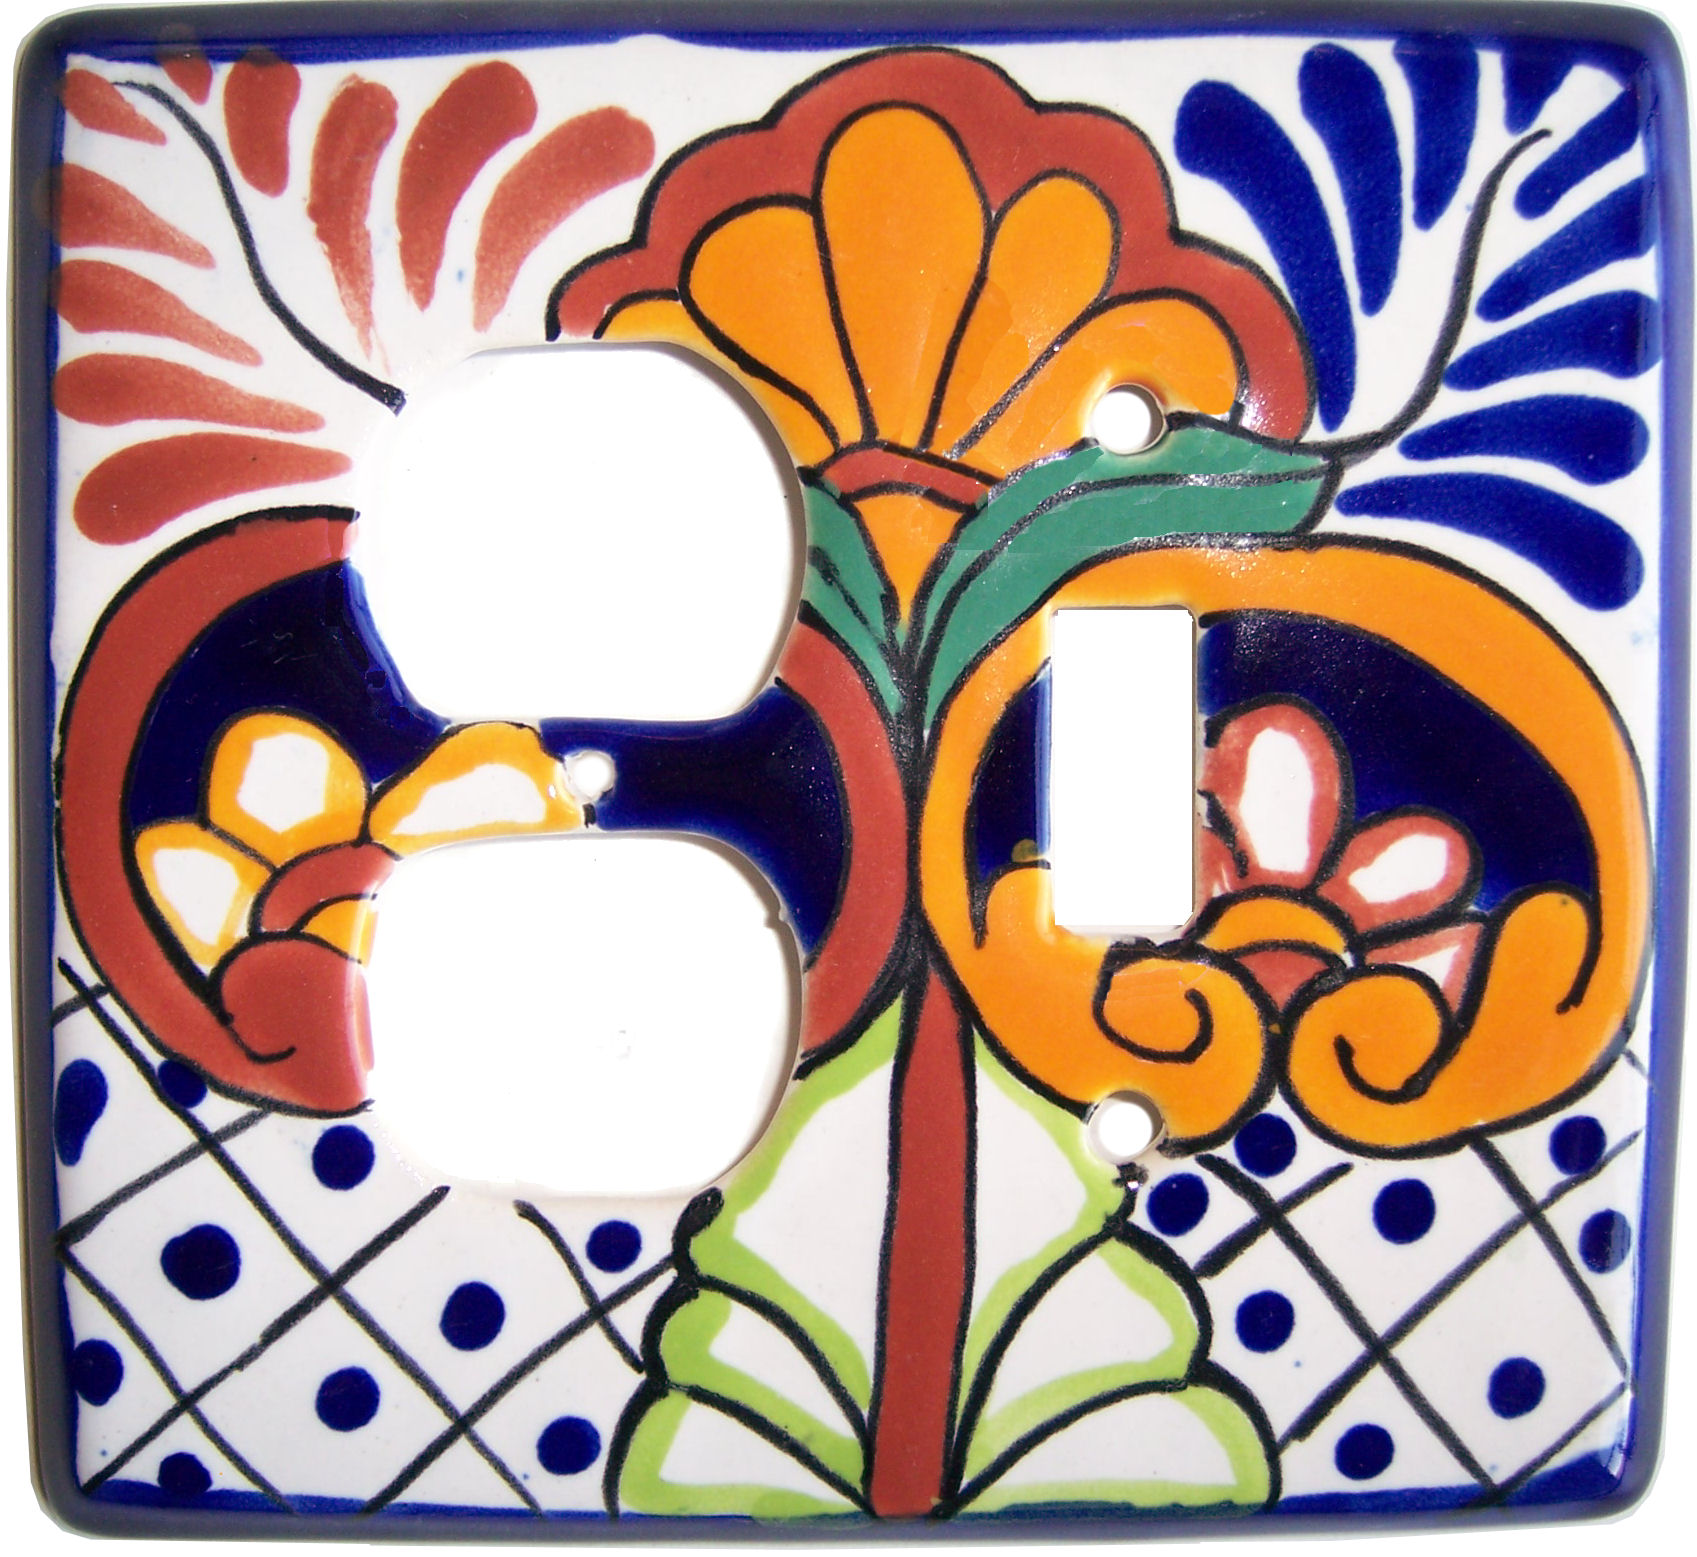 TalaMex Mantel Toggle-Outlet Mexican Talavera Ceramic Switch Plate